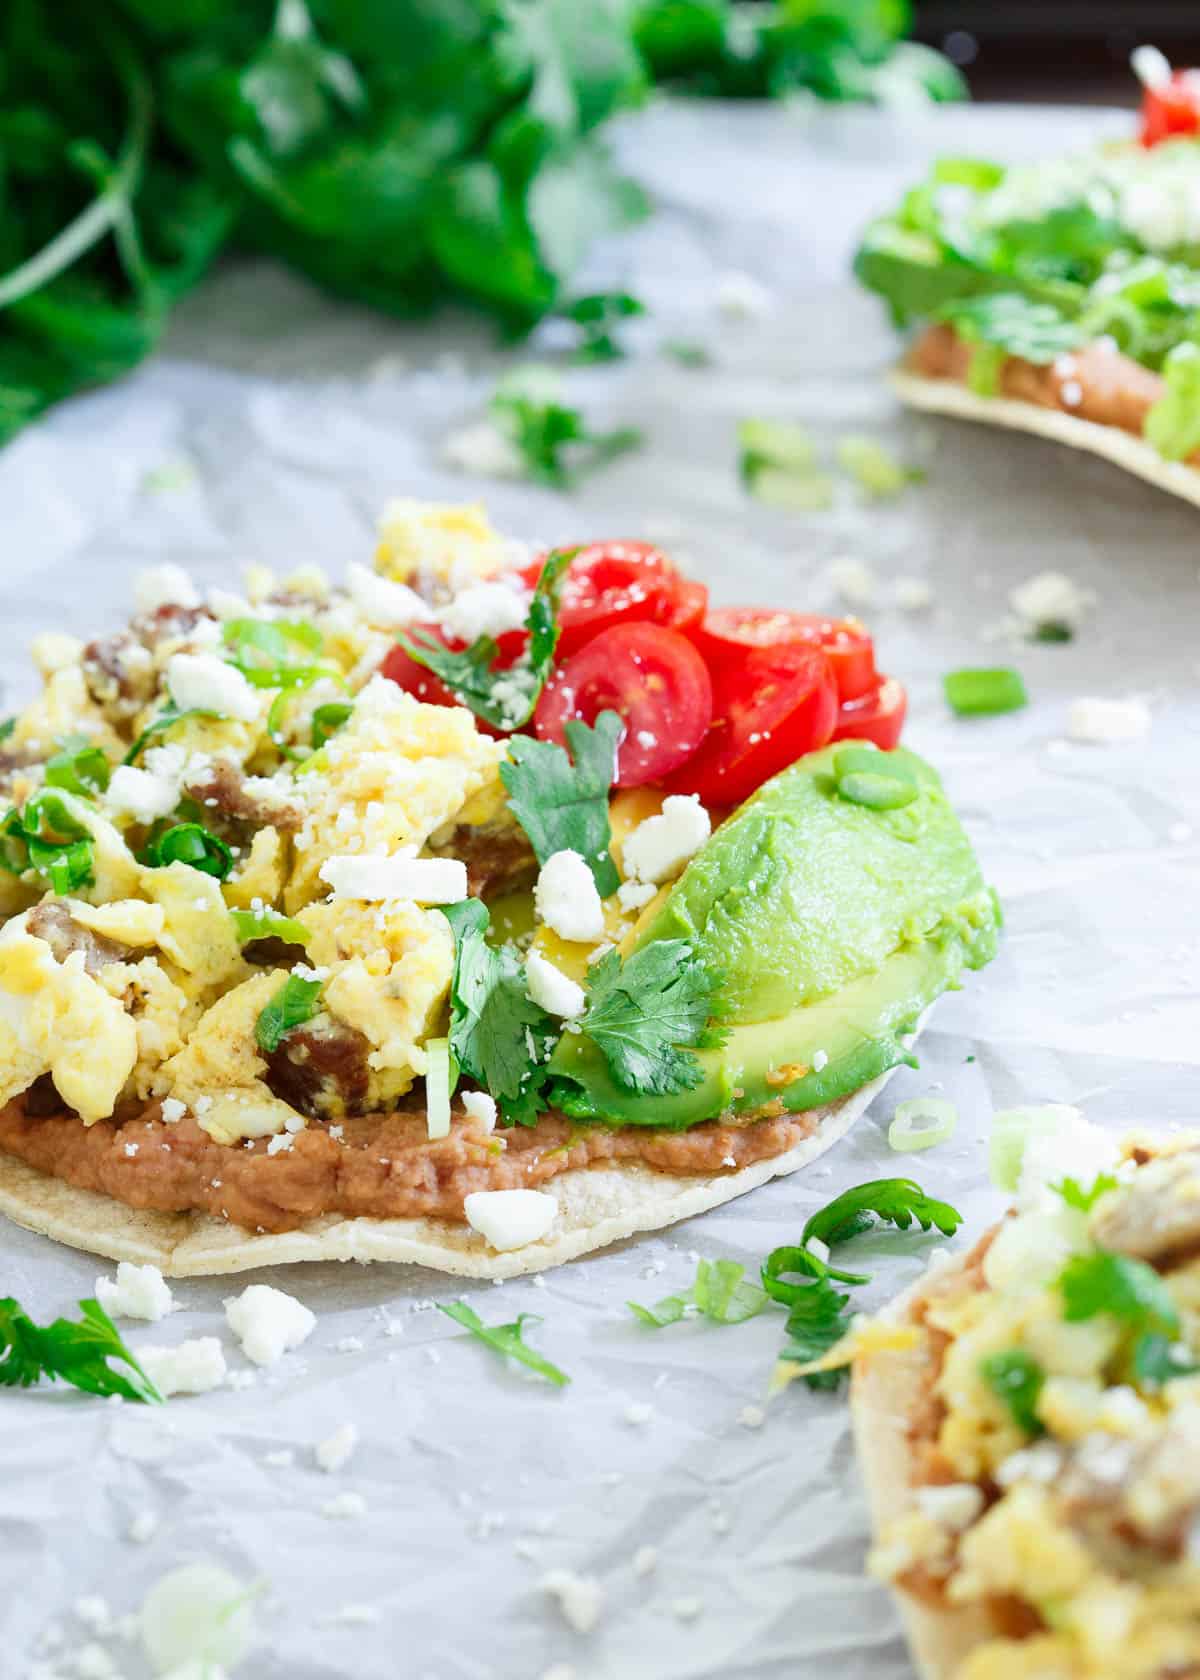 Chicken Sausage Breakfast Tostadas are a delicious savory start to the day with a bit of Mexican flair!